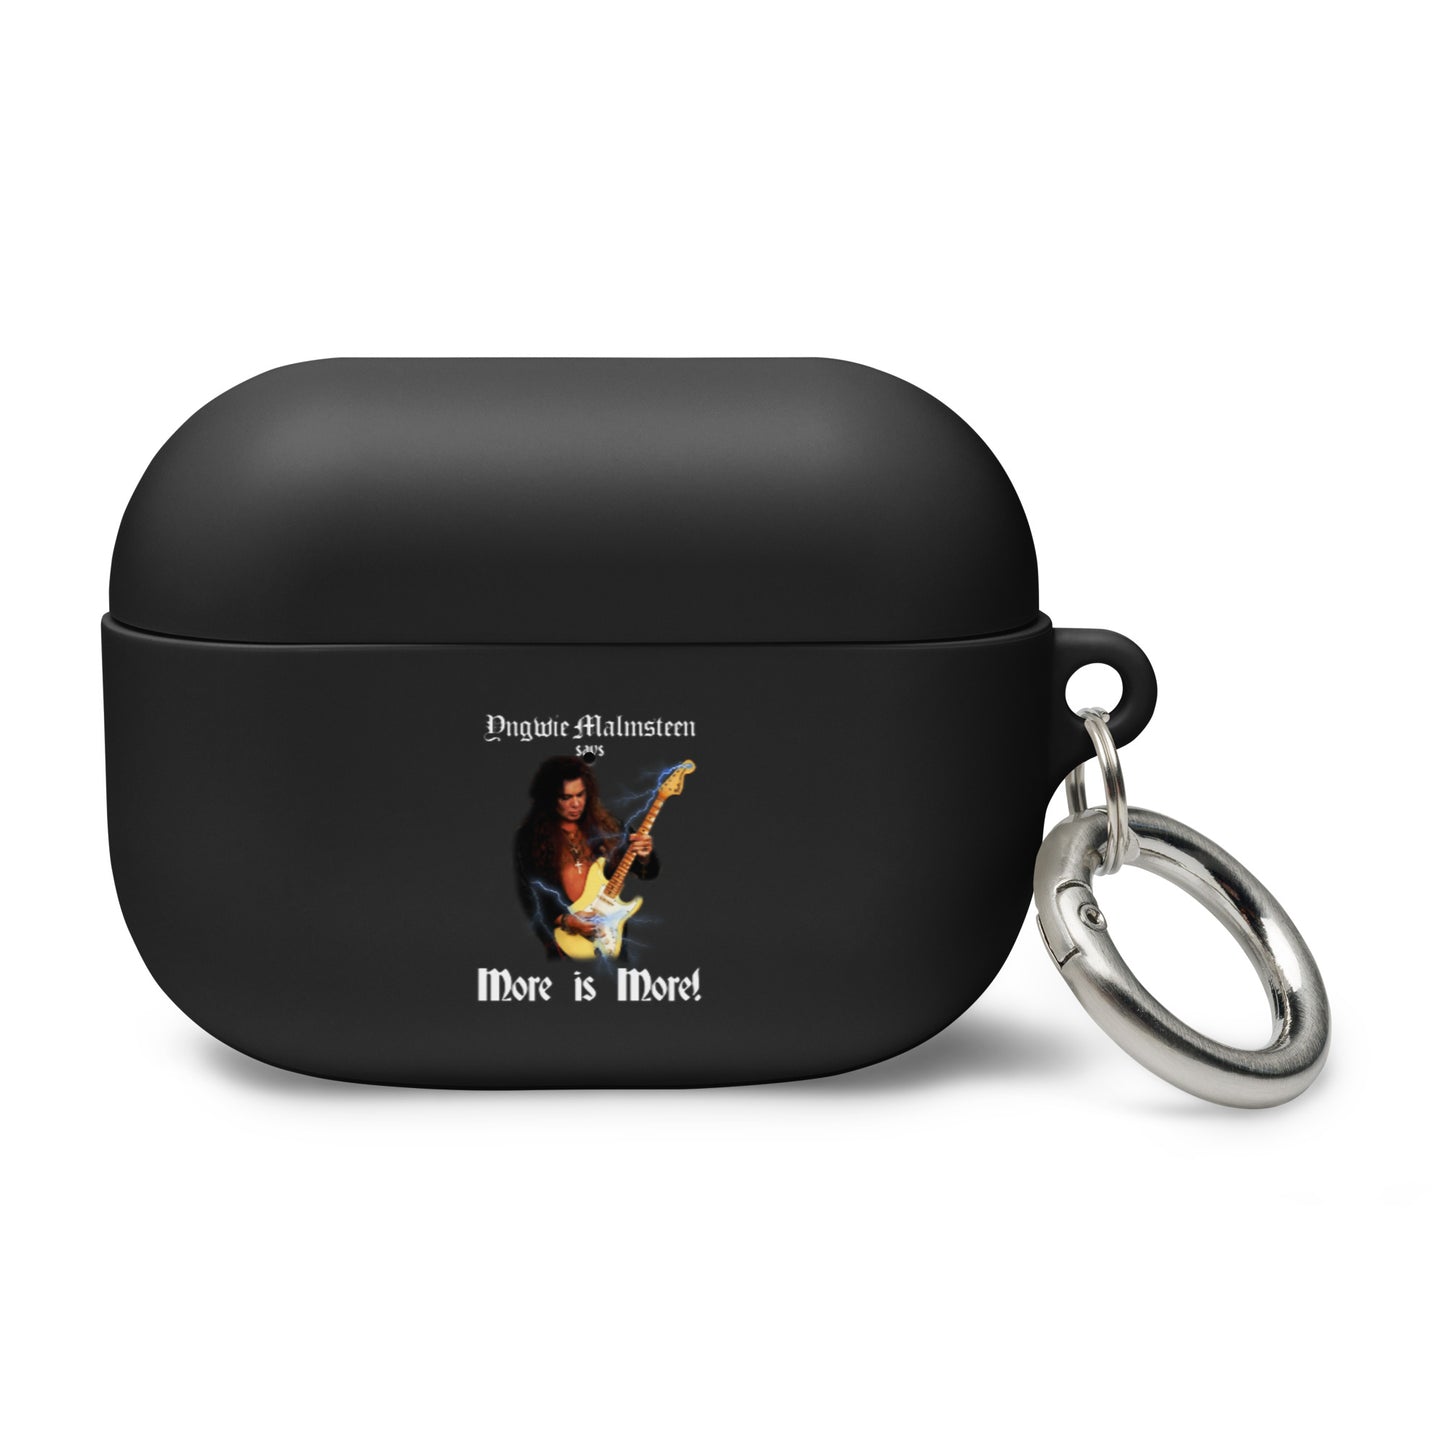 Yngwie Malmsteen - More is More AirPods case